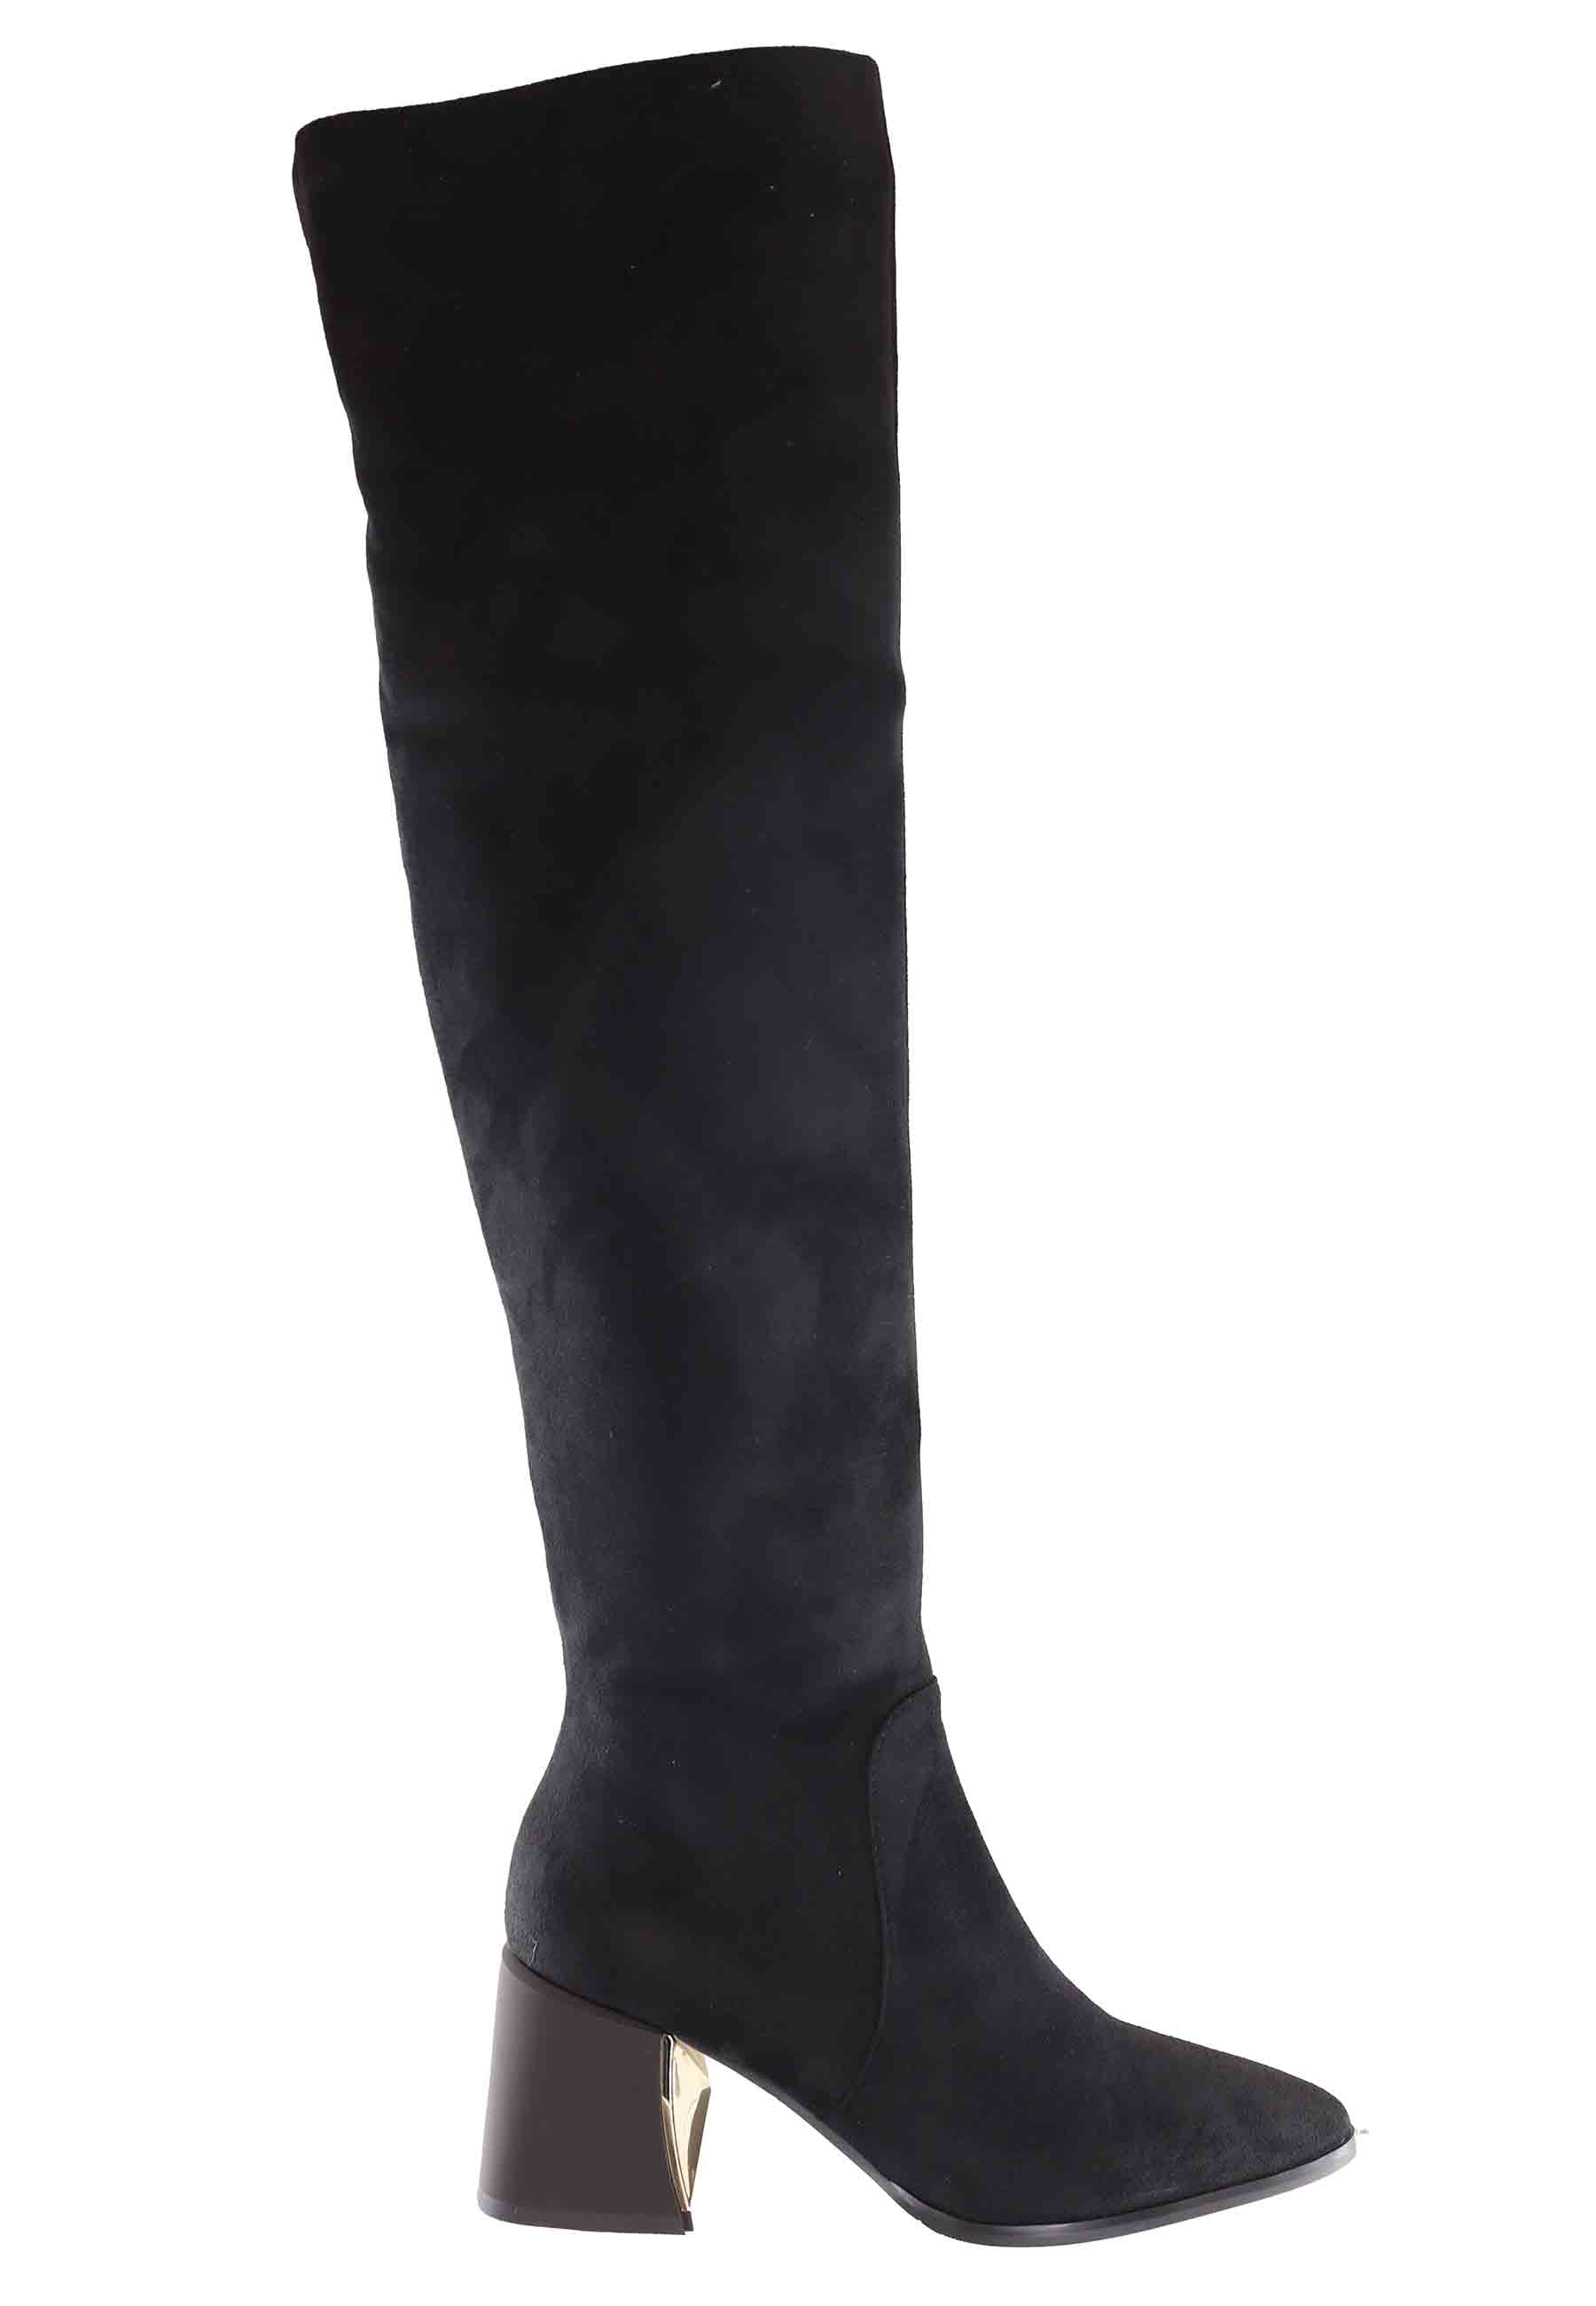 Women's boots in black stretch eco suede with high heel and square toe